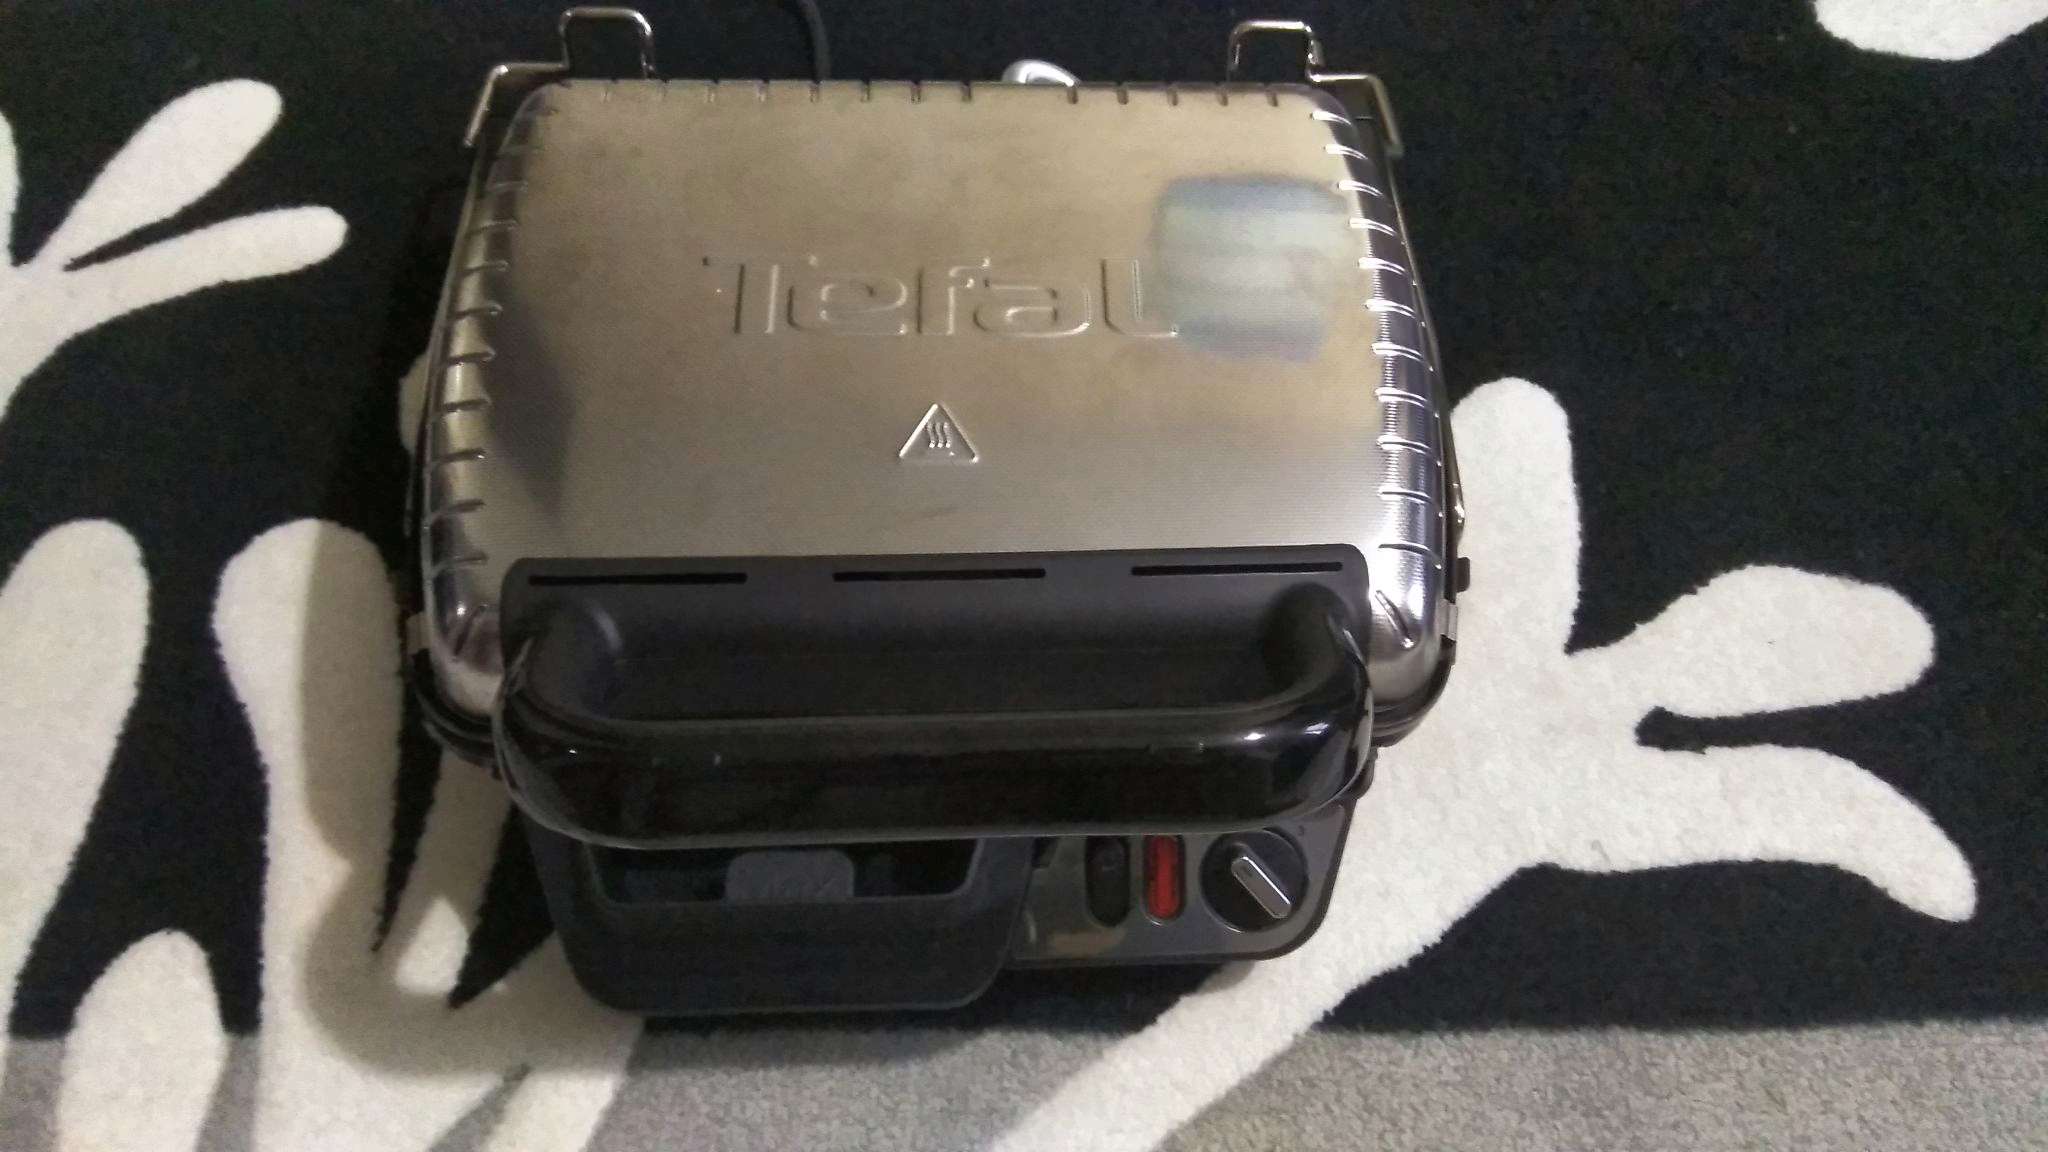 Tefal gc306012 health grill